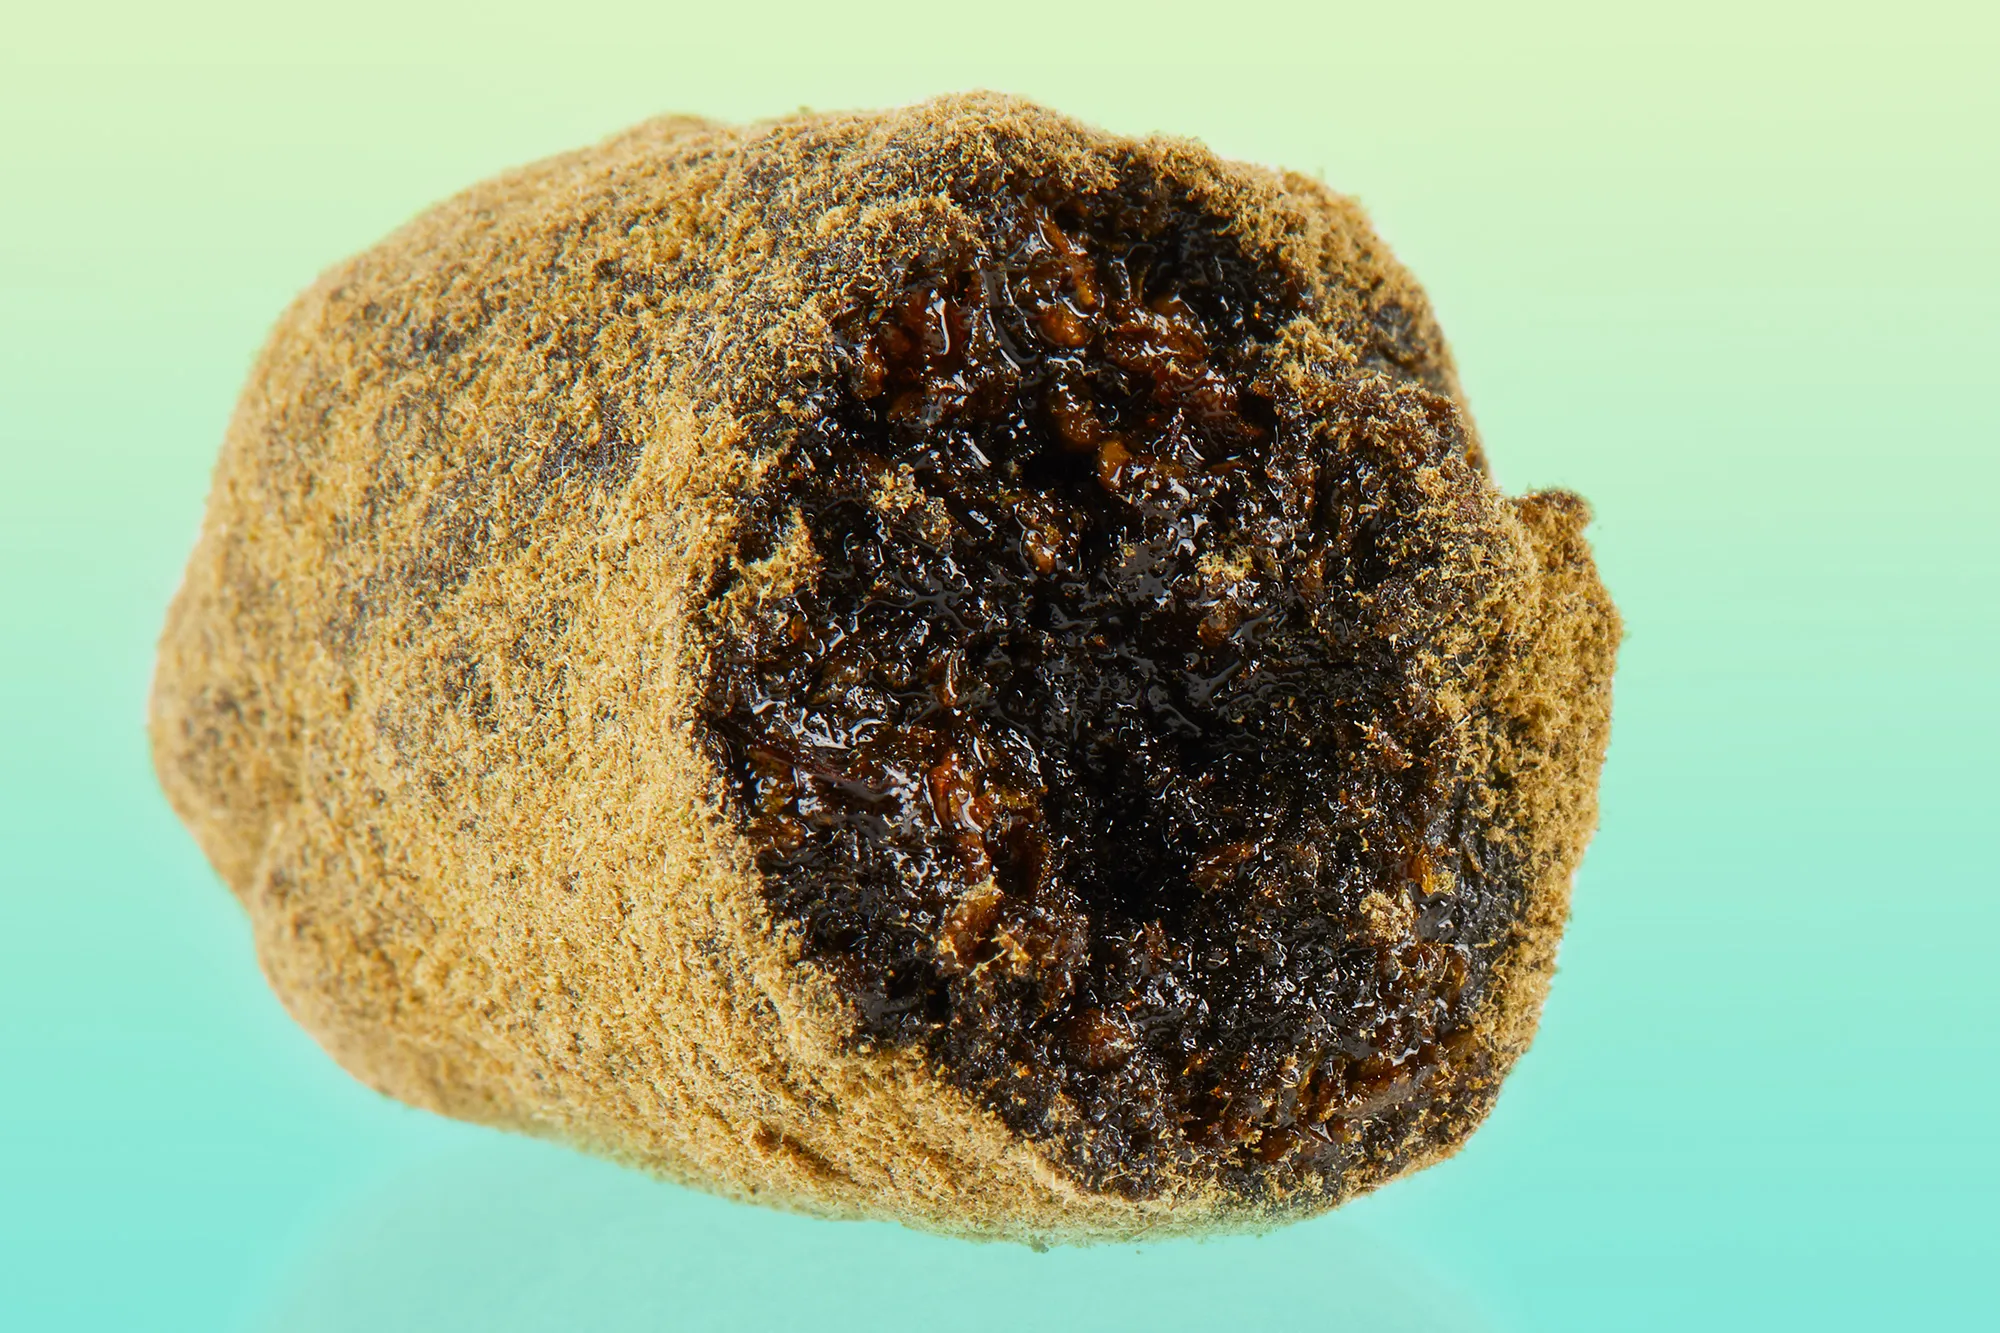 Buy Hash Online Germany. Take off with our moon rocks hash! Quality now available in a variety of flavors and scents, ranging from mild to spicy and woodsy.